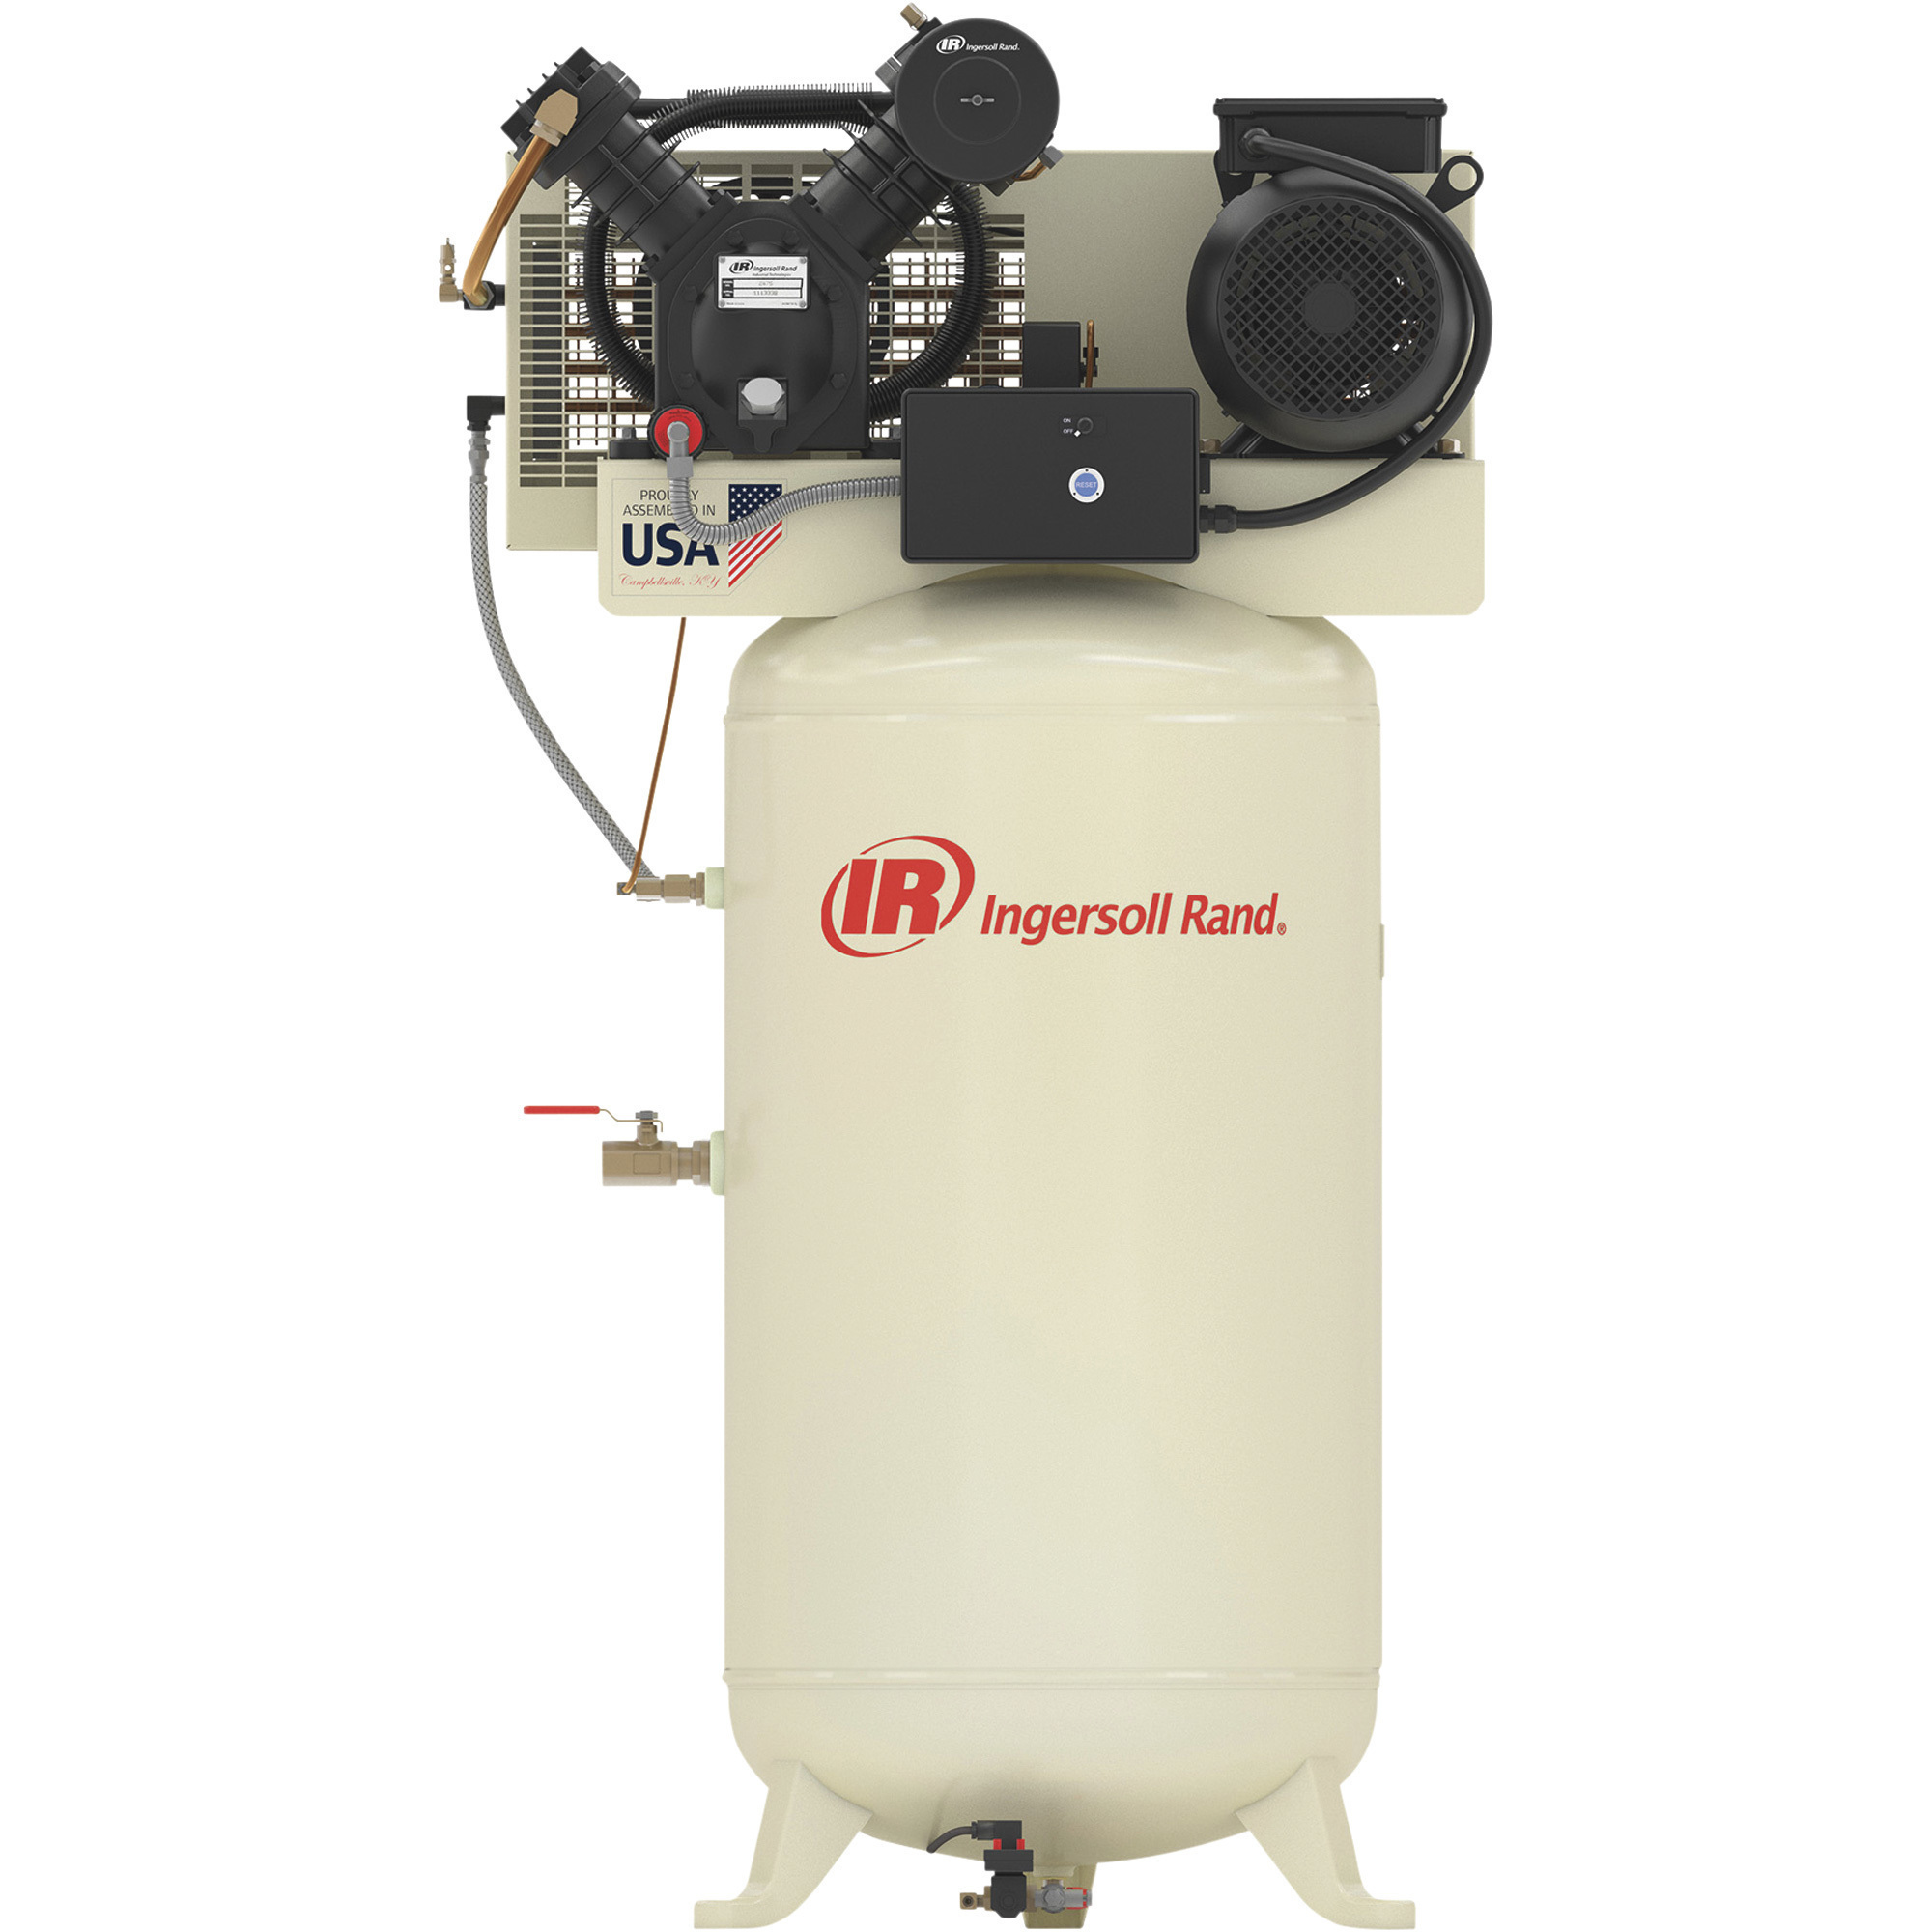 Ingersoll Rand Type-30 Reciprocating Air Compressor (Premium Package) — 7.5 HP, 230 Volt, 3 Phase, 80 Gallon Vertical, Model 2475N7.5-P -  45465556